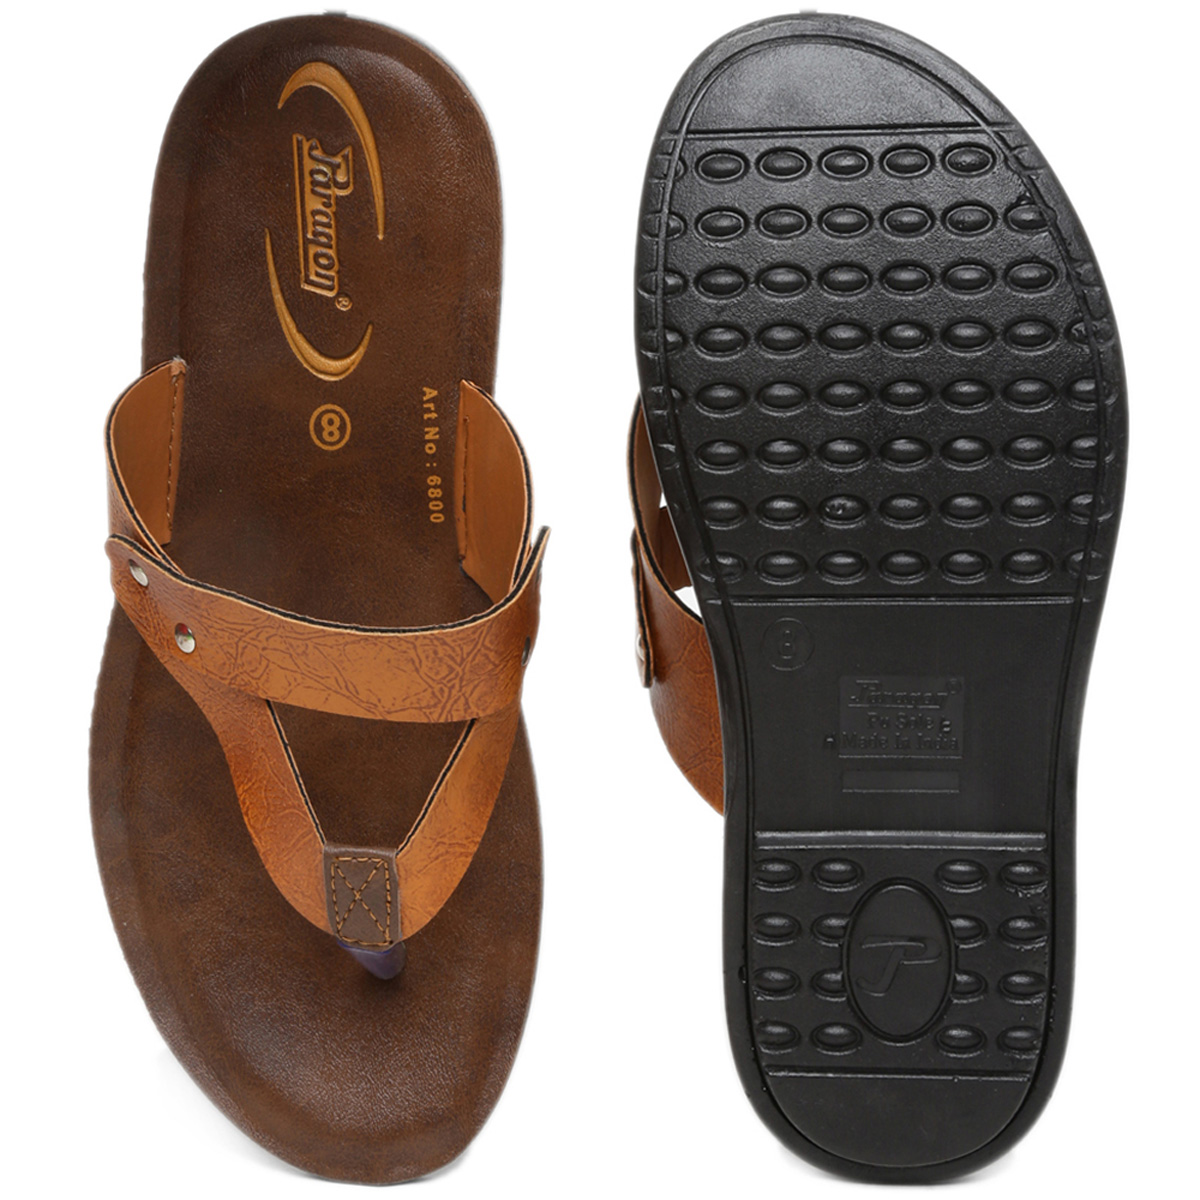 Buy Paragon Men'S Formal Brown Slippers Online @ ₹309 from ShopClues